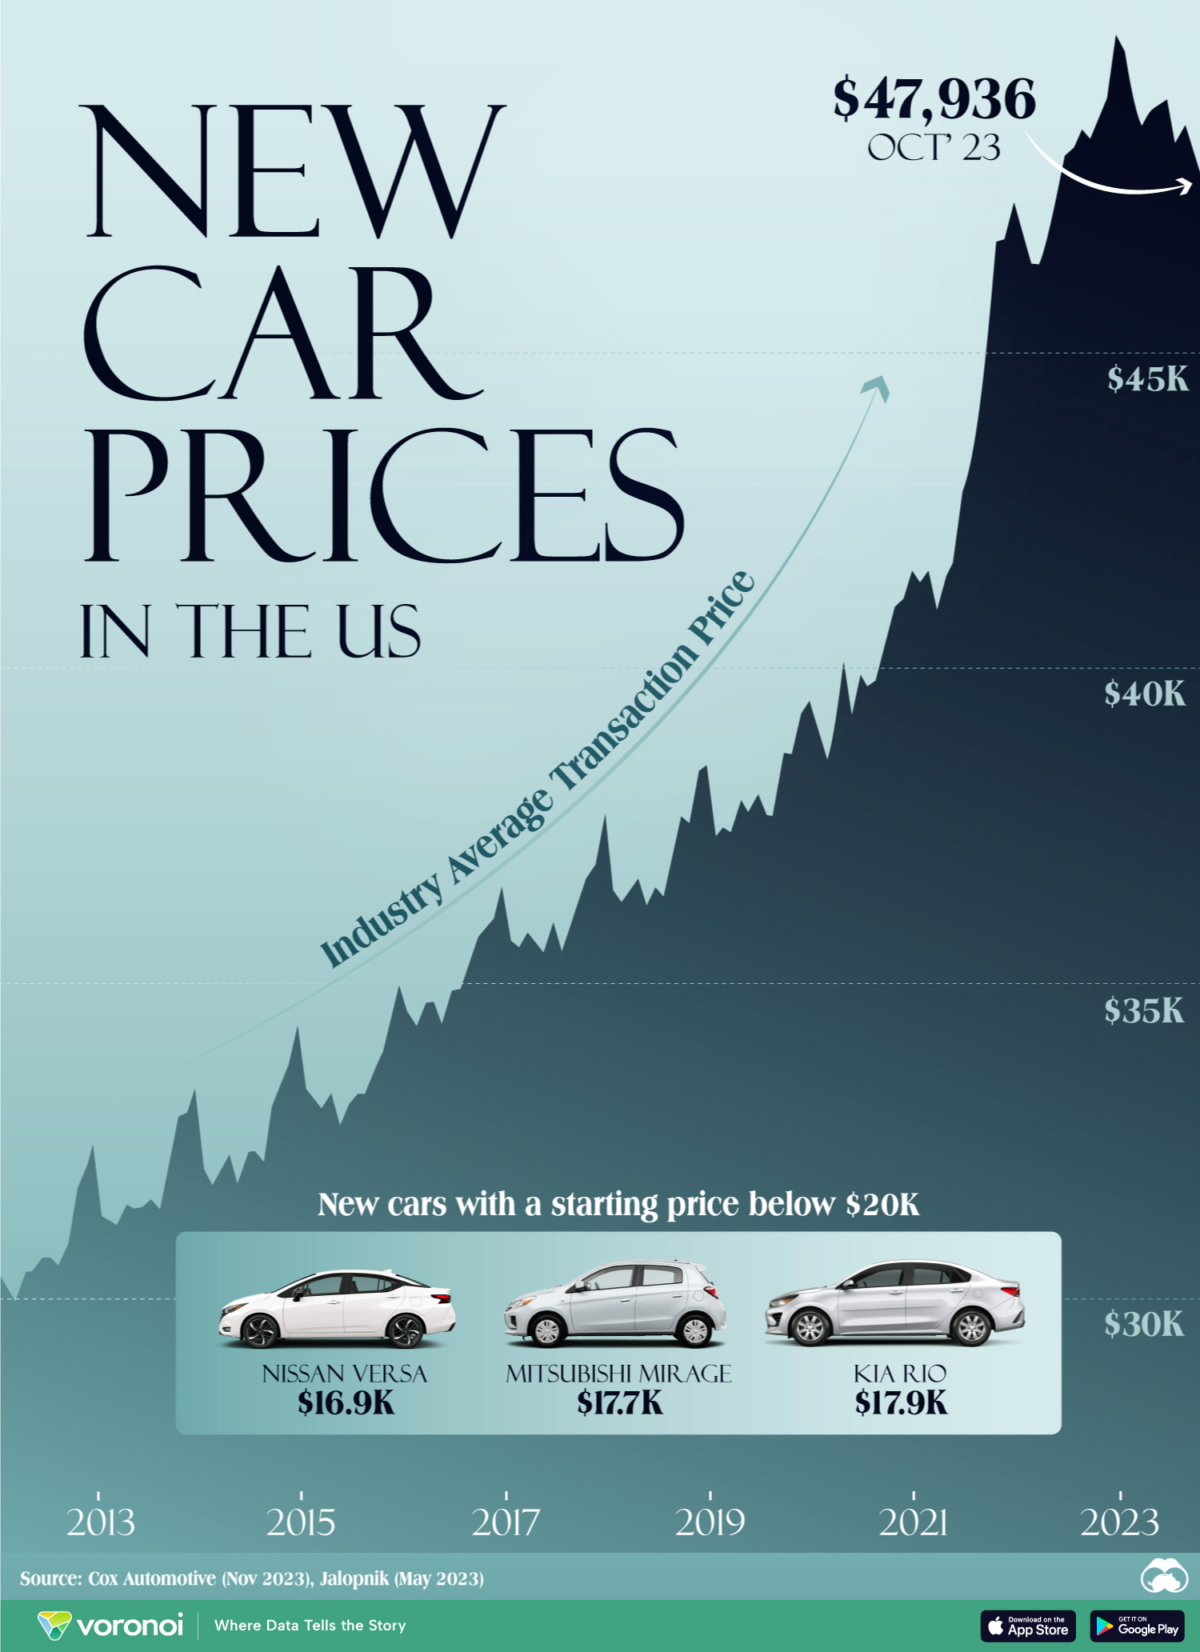 The Growth of New Car Prices in the U.S.